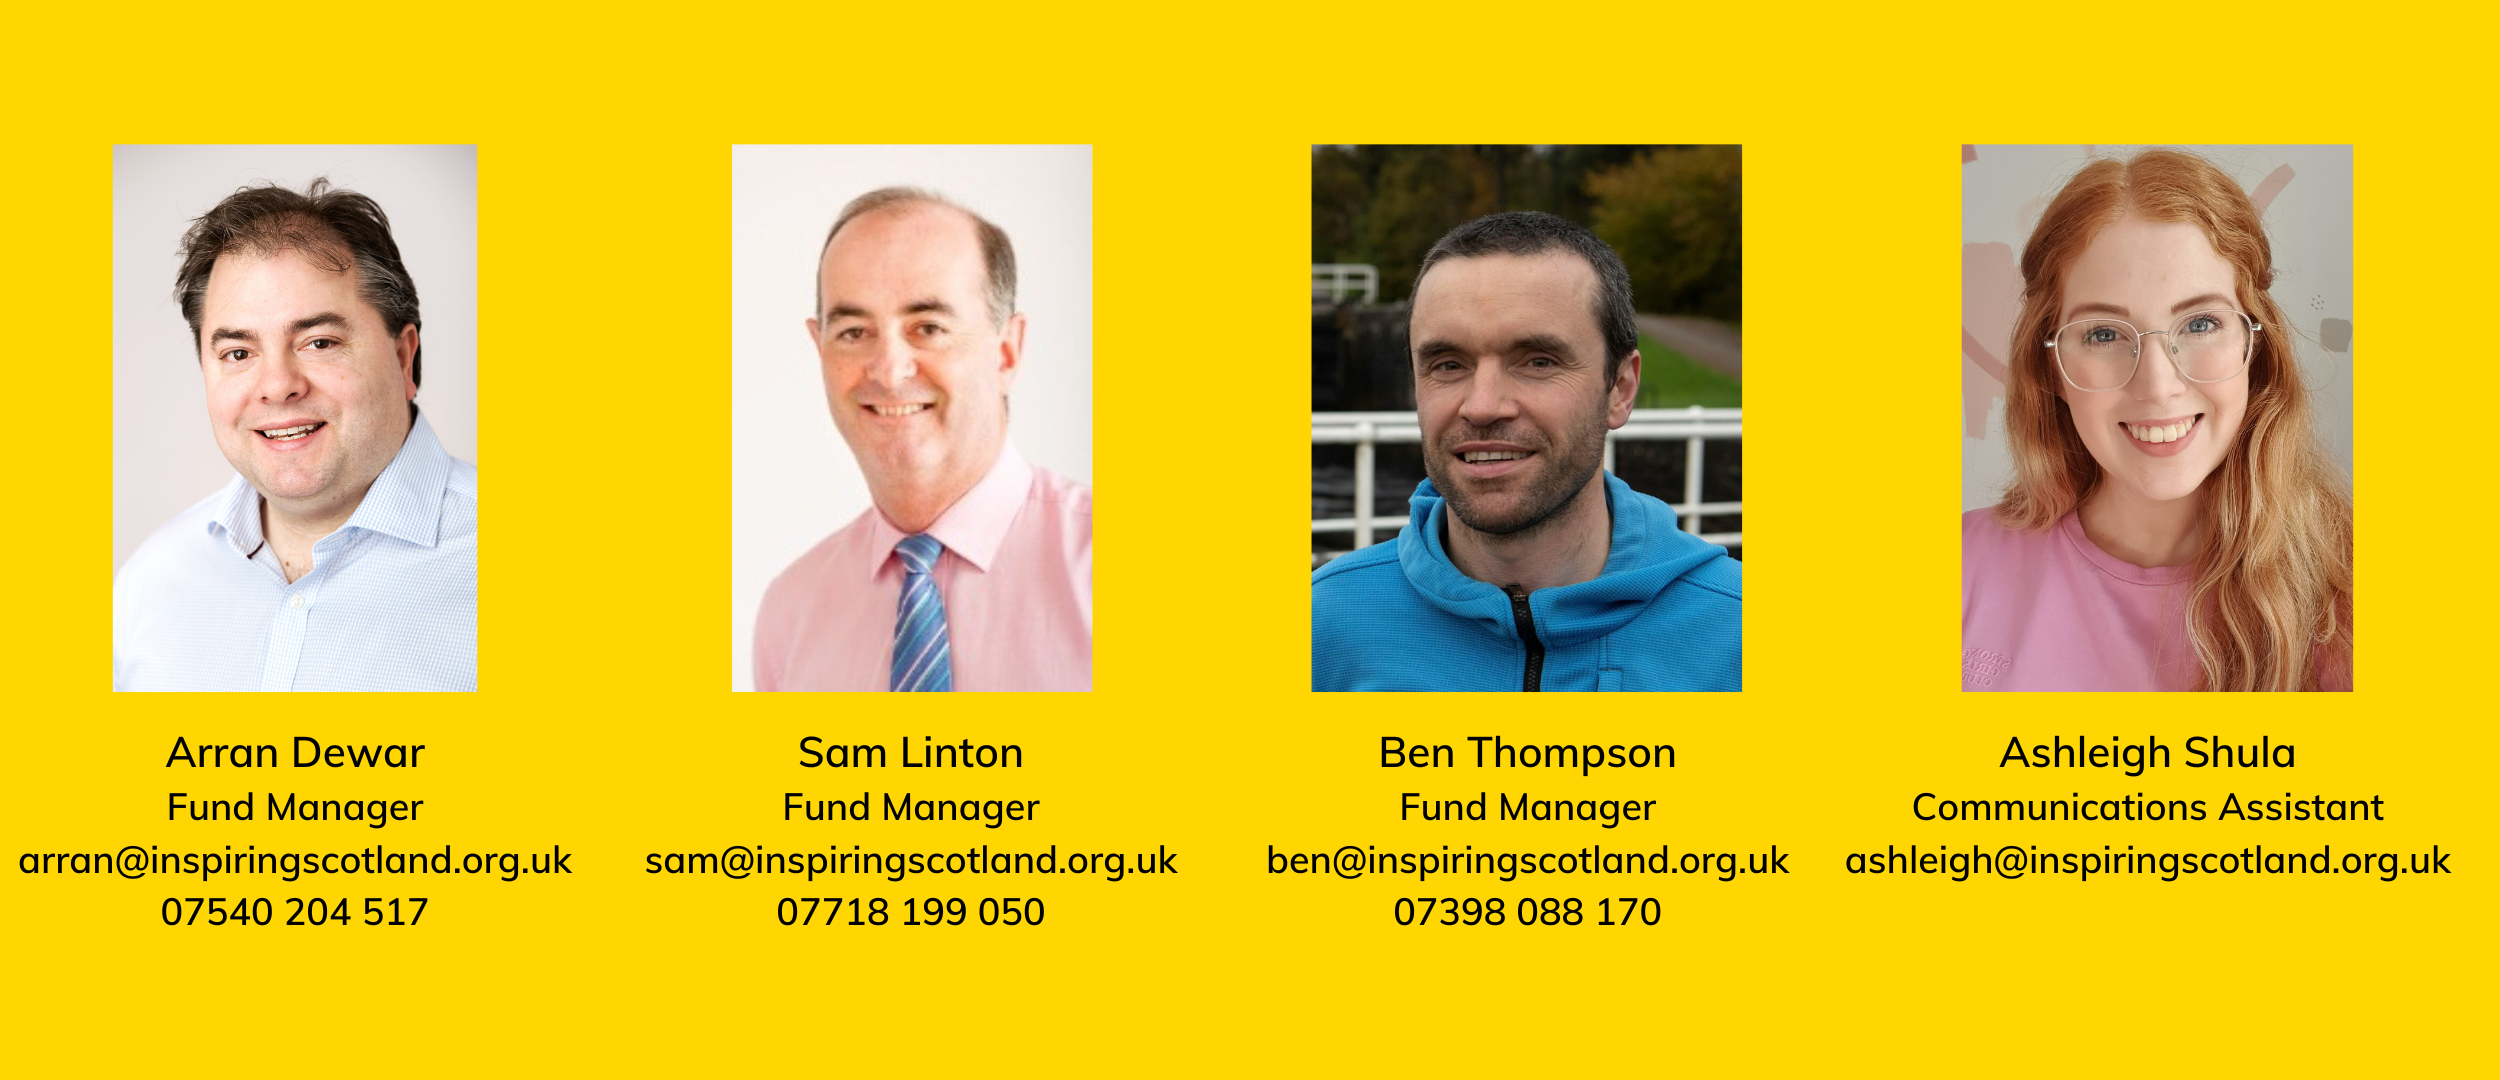 Photographs of the 4 CashBack team members with their contact details. To contact one of the fund managers email arran@inspiringscotland.org.uk or ben@inspiringscotland.org.uk or sam@inspiringscotland.org.uk. To email about communications, email ashleigh@inspiringscotland.org.uk